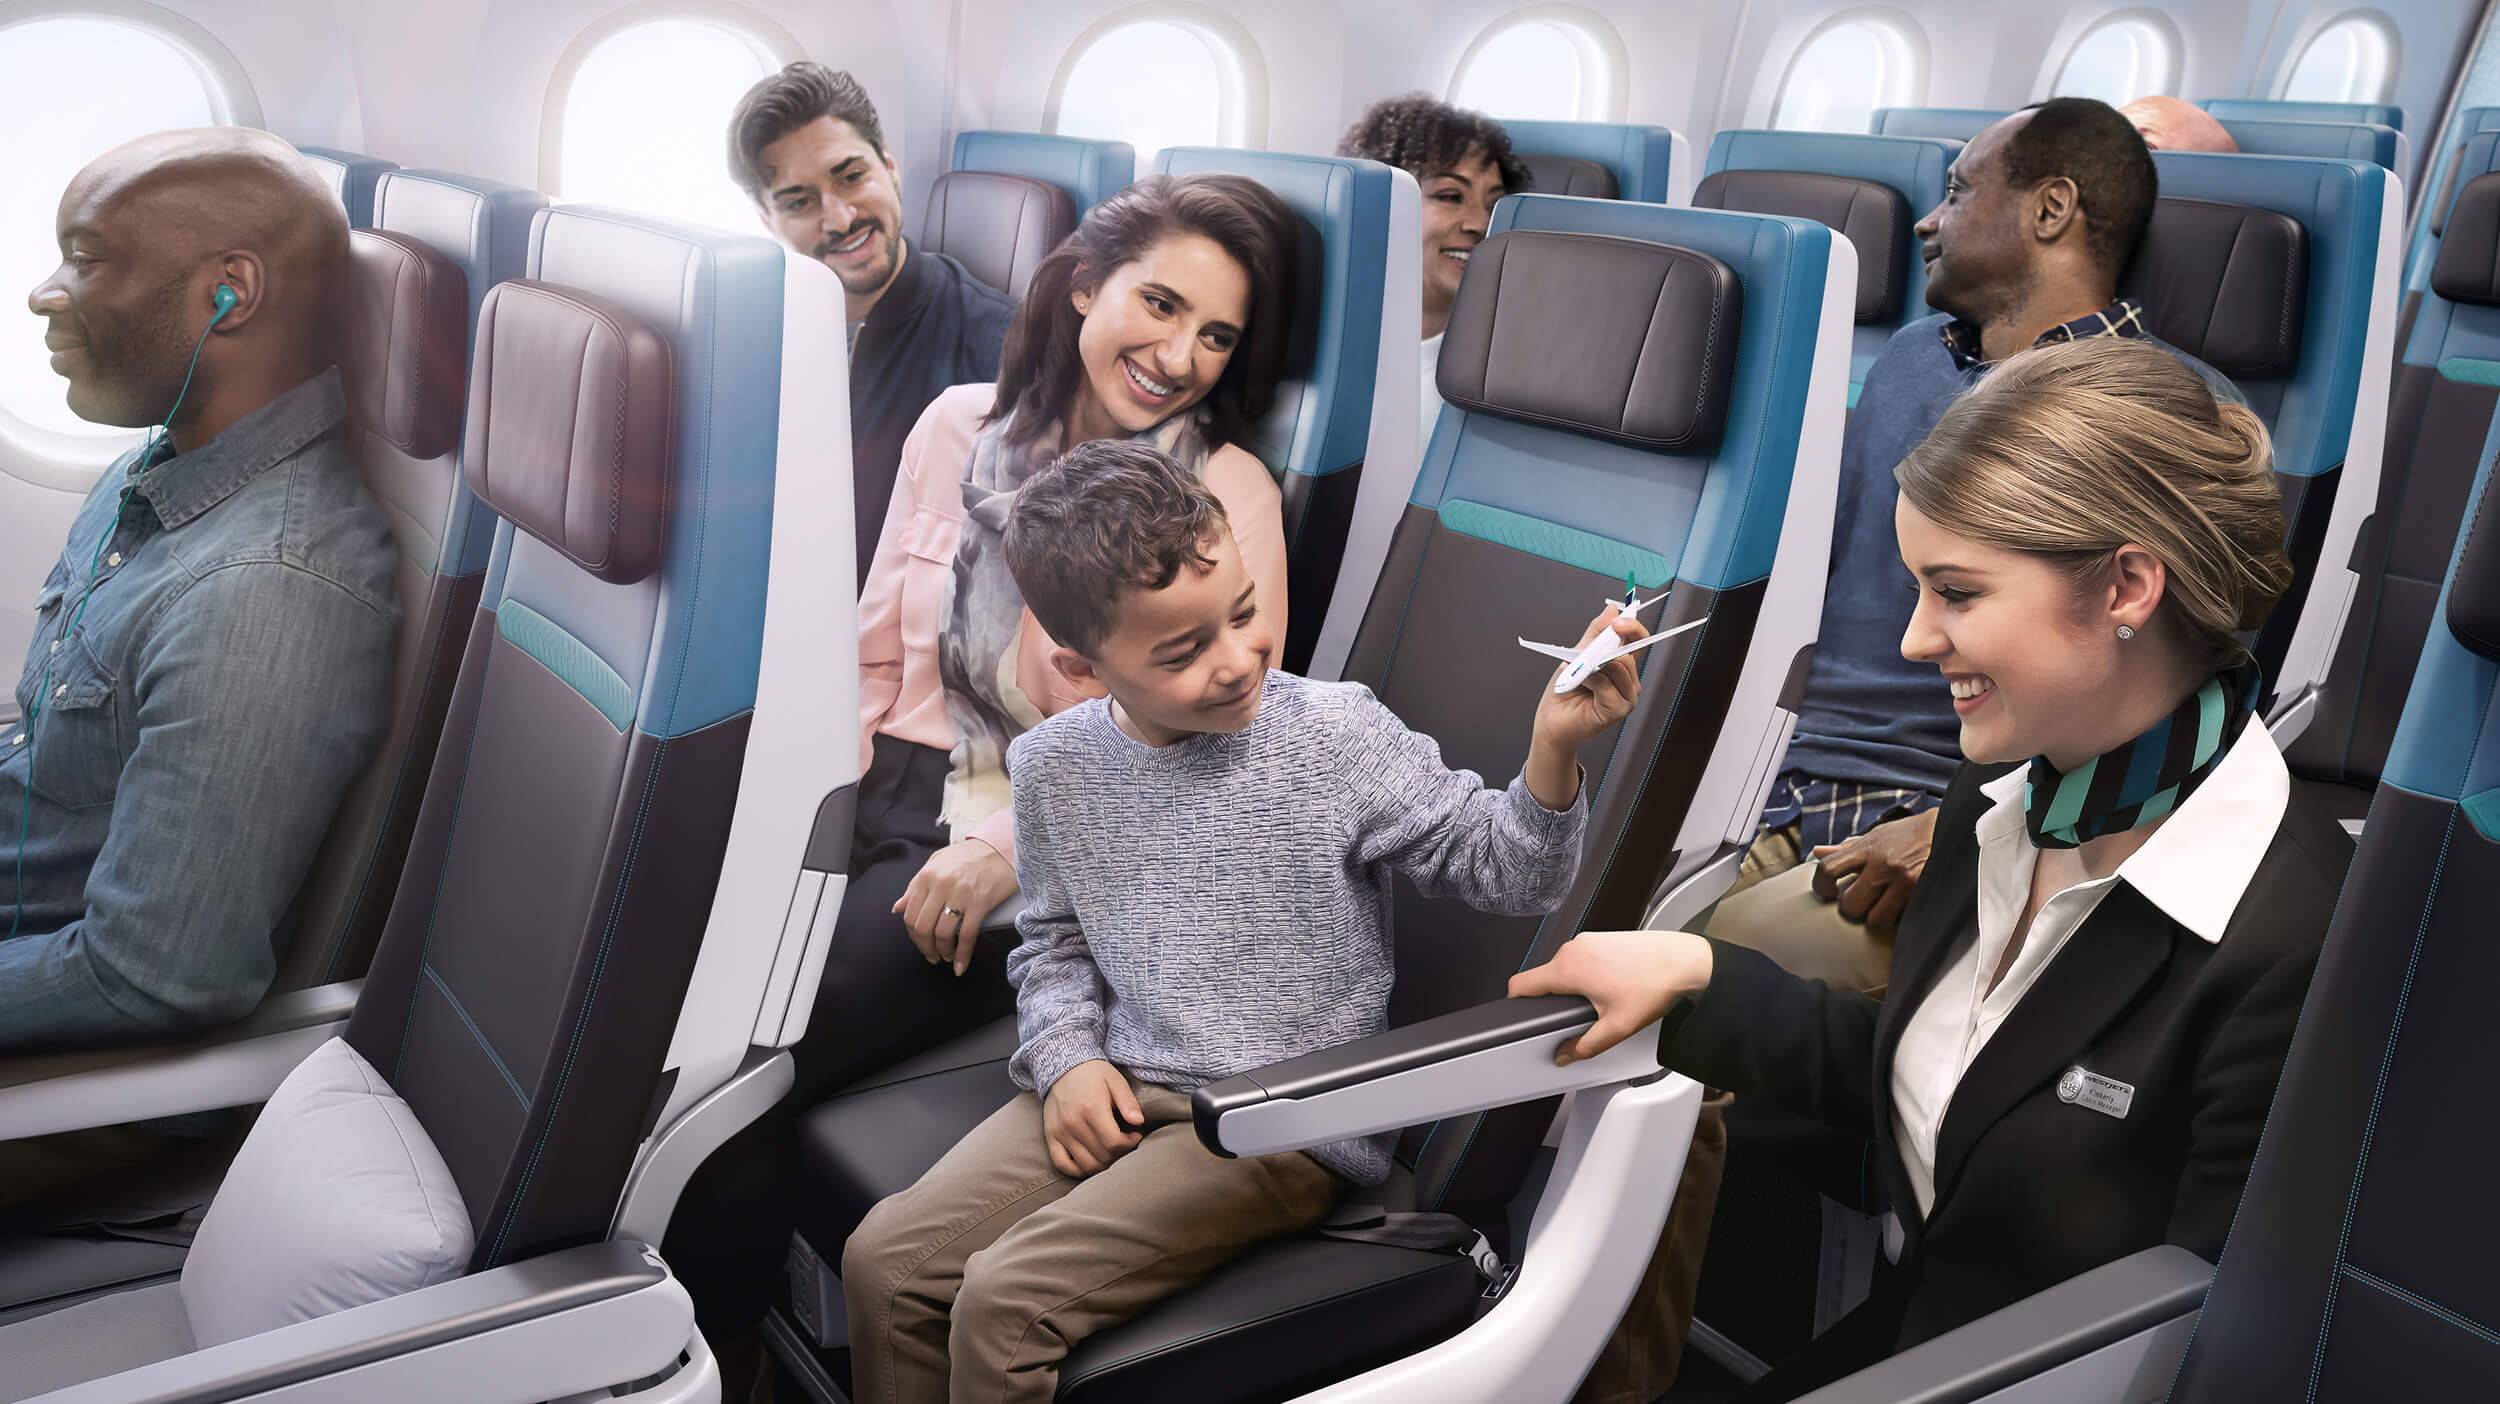 Smiling passengers relaxed in their seats in the WestJet 787 Economy Class cabin